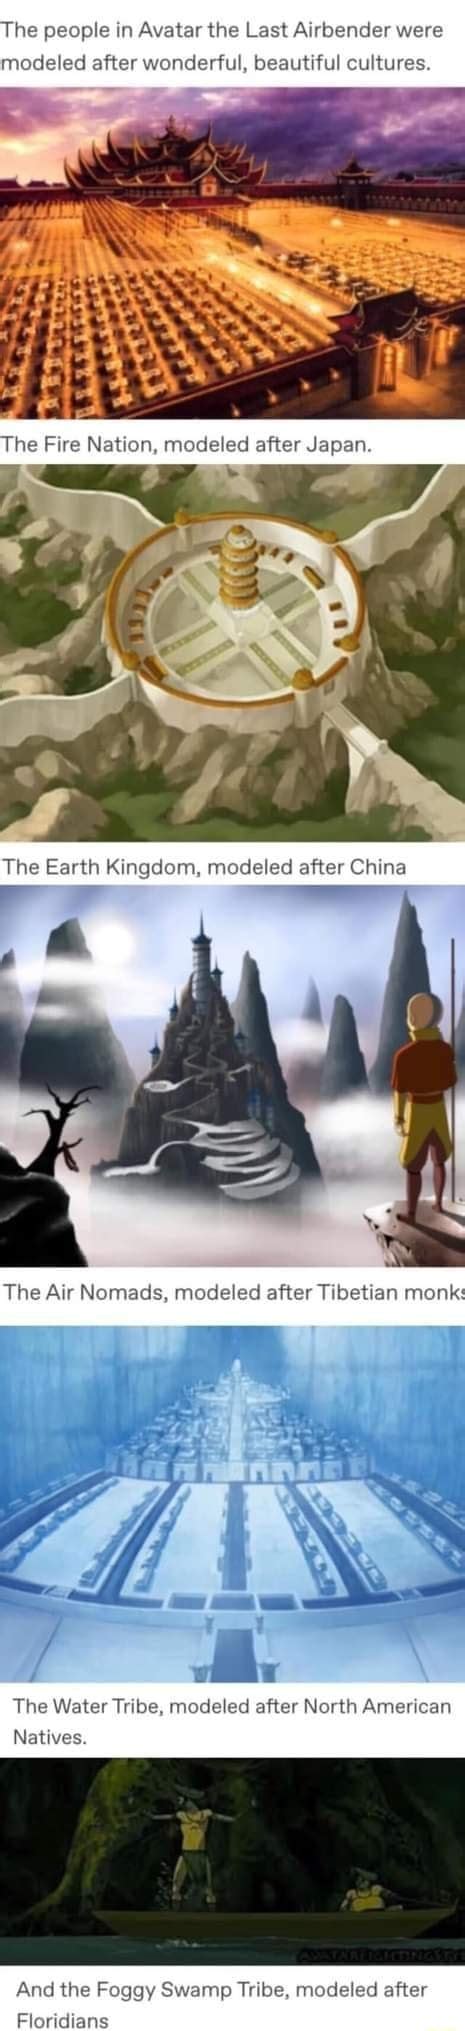 The People In Avatar The Last Airbender Were Modeled After Wonderful